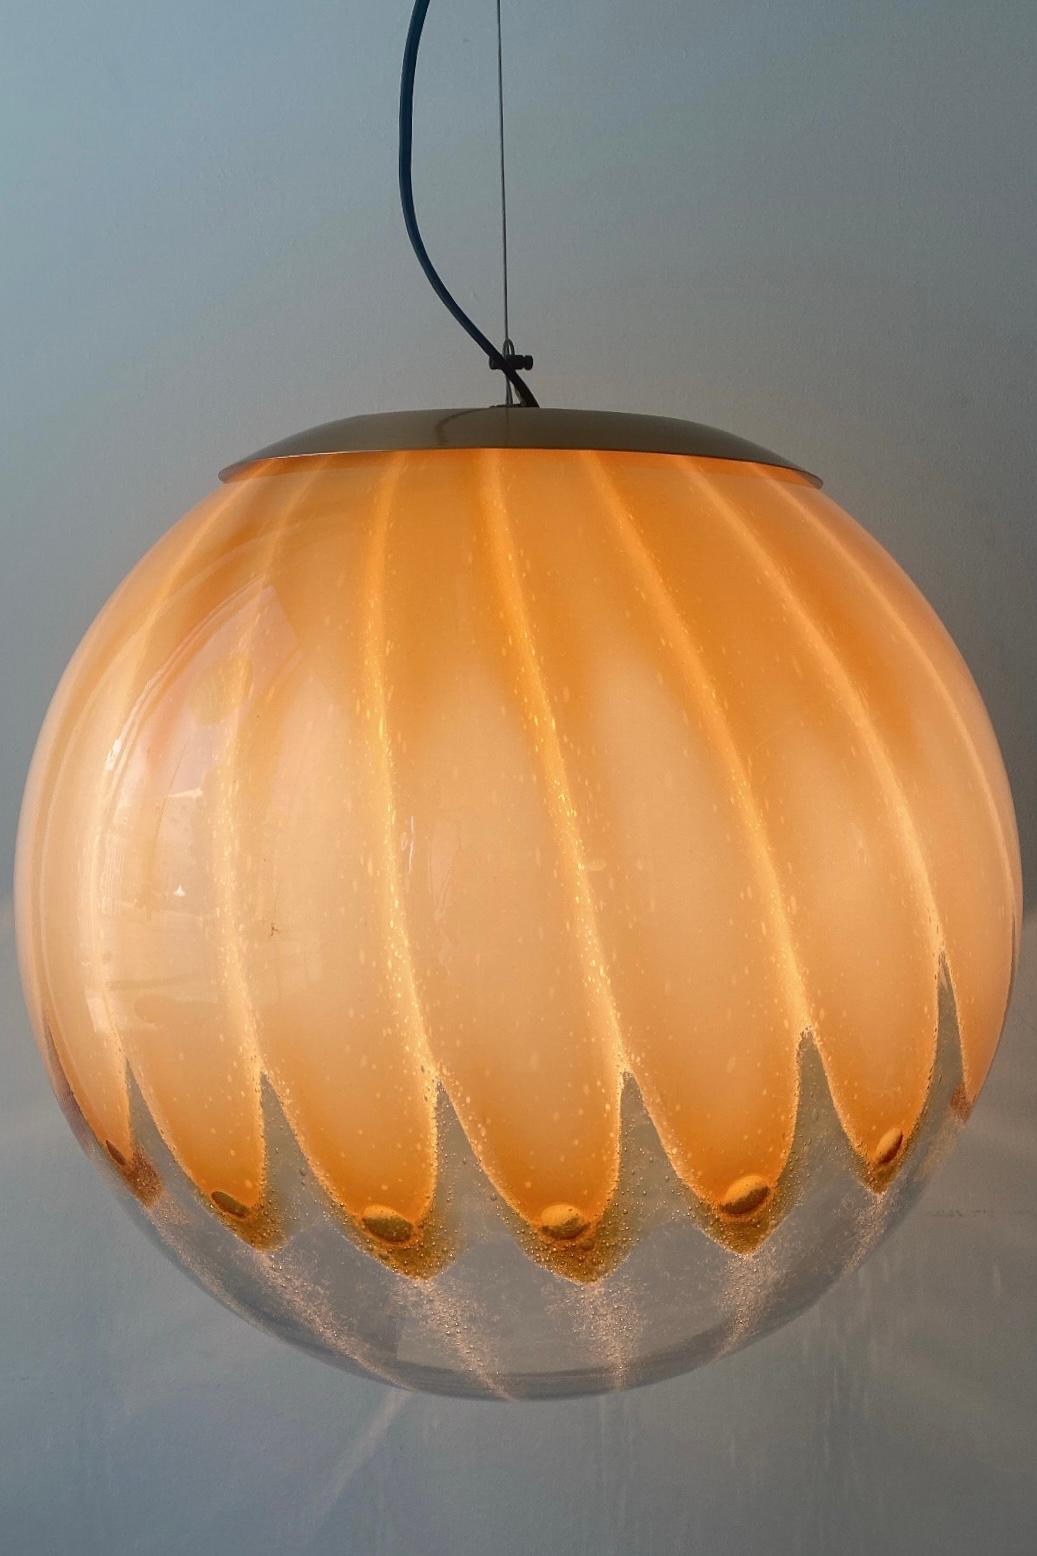 Large vintage Murano anemone pendant ceiling lamp in hand-blown cream yellow glass. The glass is designed in a round shape with a pattern. Handmade in Italy, 1970s. Comes with adjustable brass suspension.

D: 40 cm

